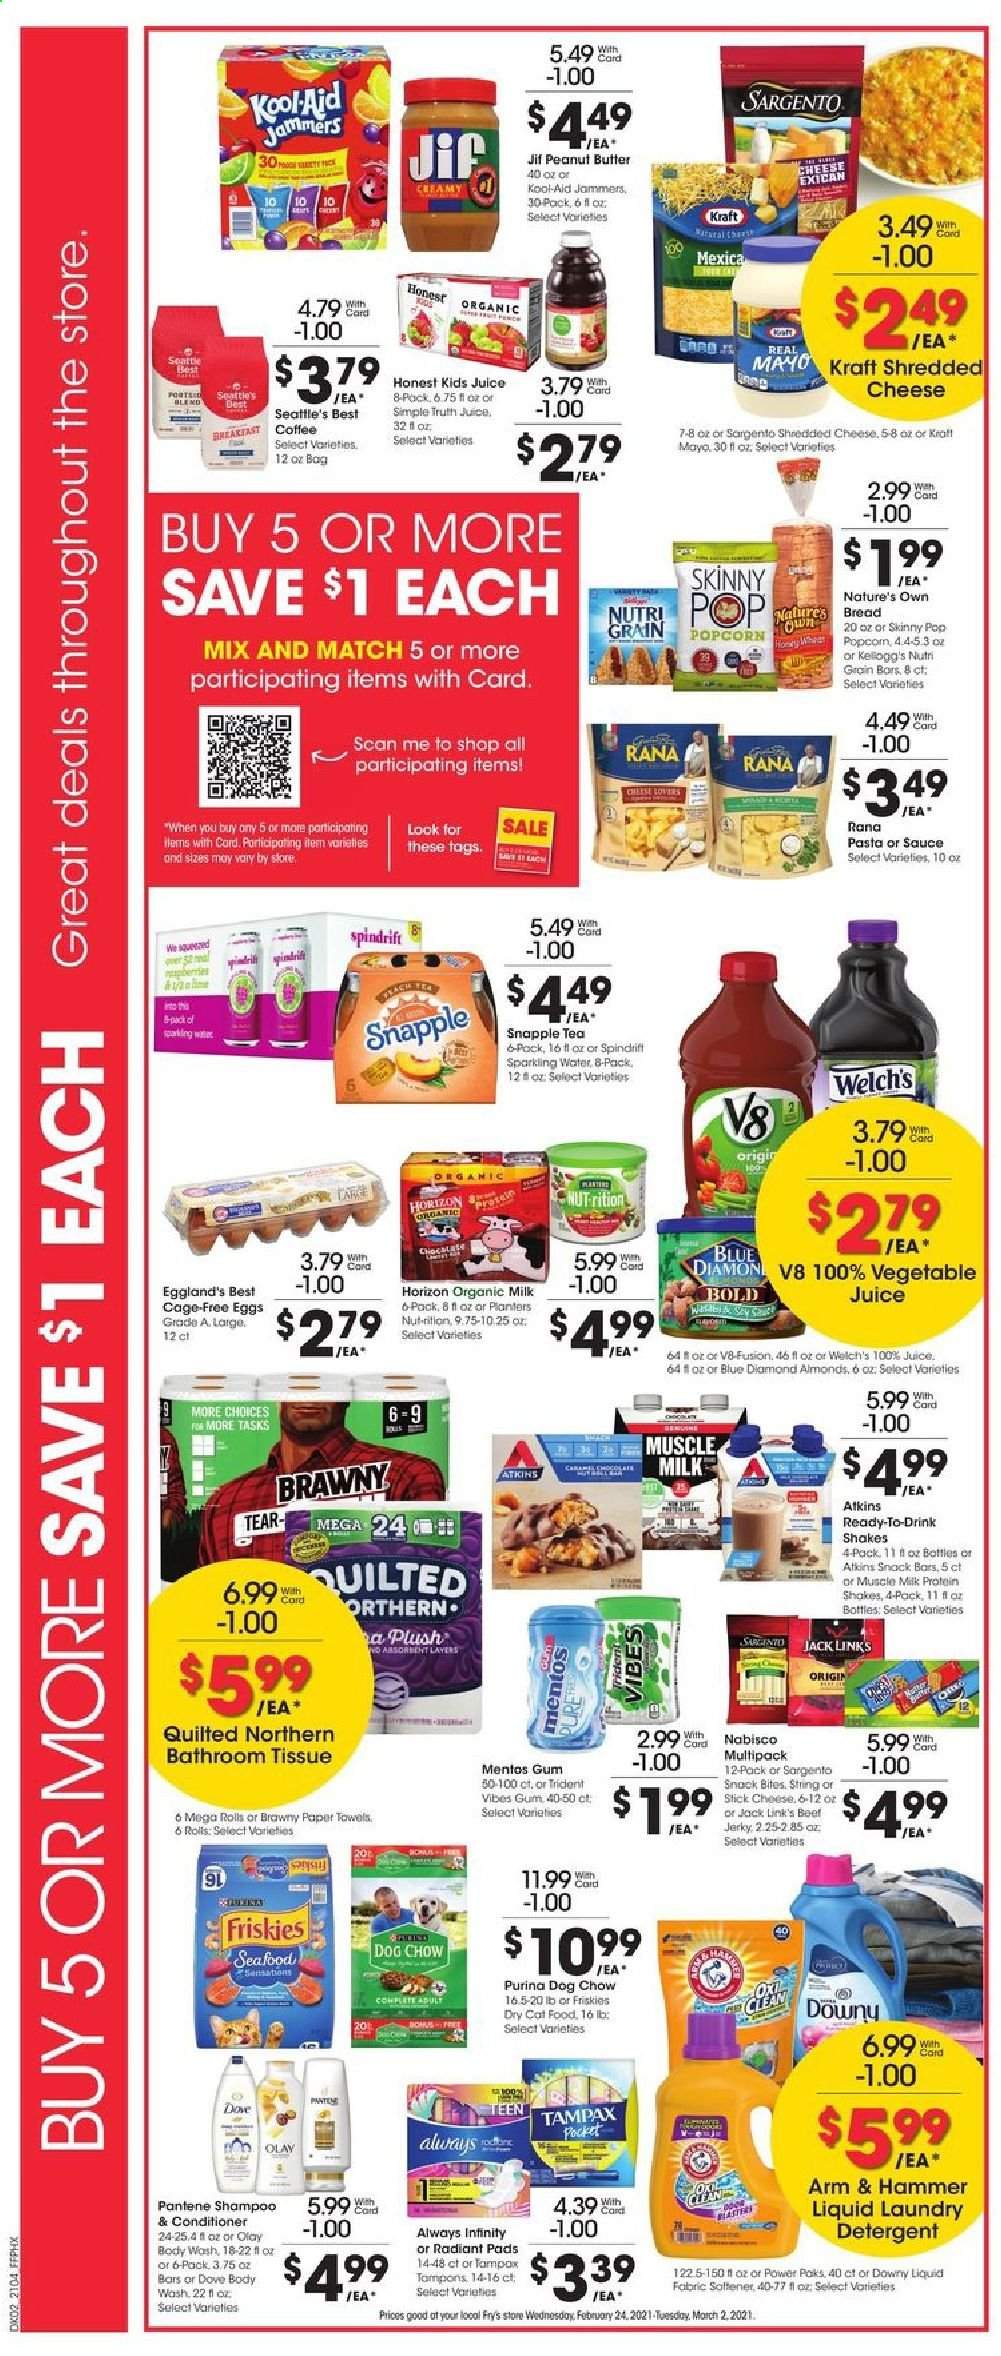 thumbnail - Fry’s Flyer - 02/24/2021 - 03/02/2021 - Sales products - bread, Welch's, Giovanni Rana, Kraft®, beef jerky, jerky, cheese, Sargento, organic milk, protein drink, shake, muscle milk, eggs, mayonnaise, Mentos, Trident, snack bar, snack, popcorn, cheese sticks, Skinny Pop, Jack Link's, ARM & HAMMER, Nutri-Grain, pasta, Rana, peanut butter, Jif, almonds, Planters, Blue Diamond, juice, Snapple, Spindrift, tea, coffee, Dove, bath tissue, Quilted Northern, tissues, detergent, fabric softener, laundry detergent, body wash, shampoo, tampons, Always Infinity, Olay, conditioner, Pantene, paper, cage, animal food, cat food, Dog Chow, Purina, dry cat food, Friskies, Nature's Own. Page 3.